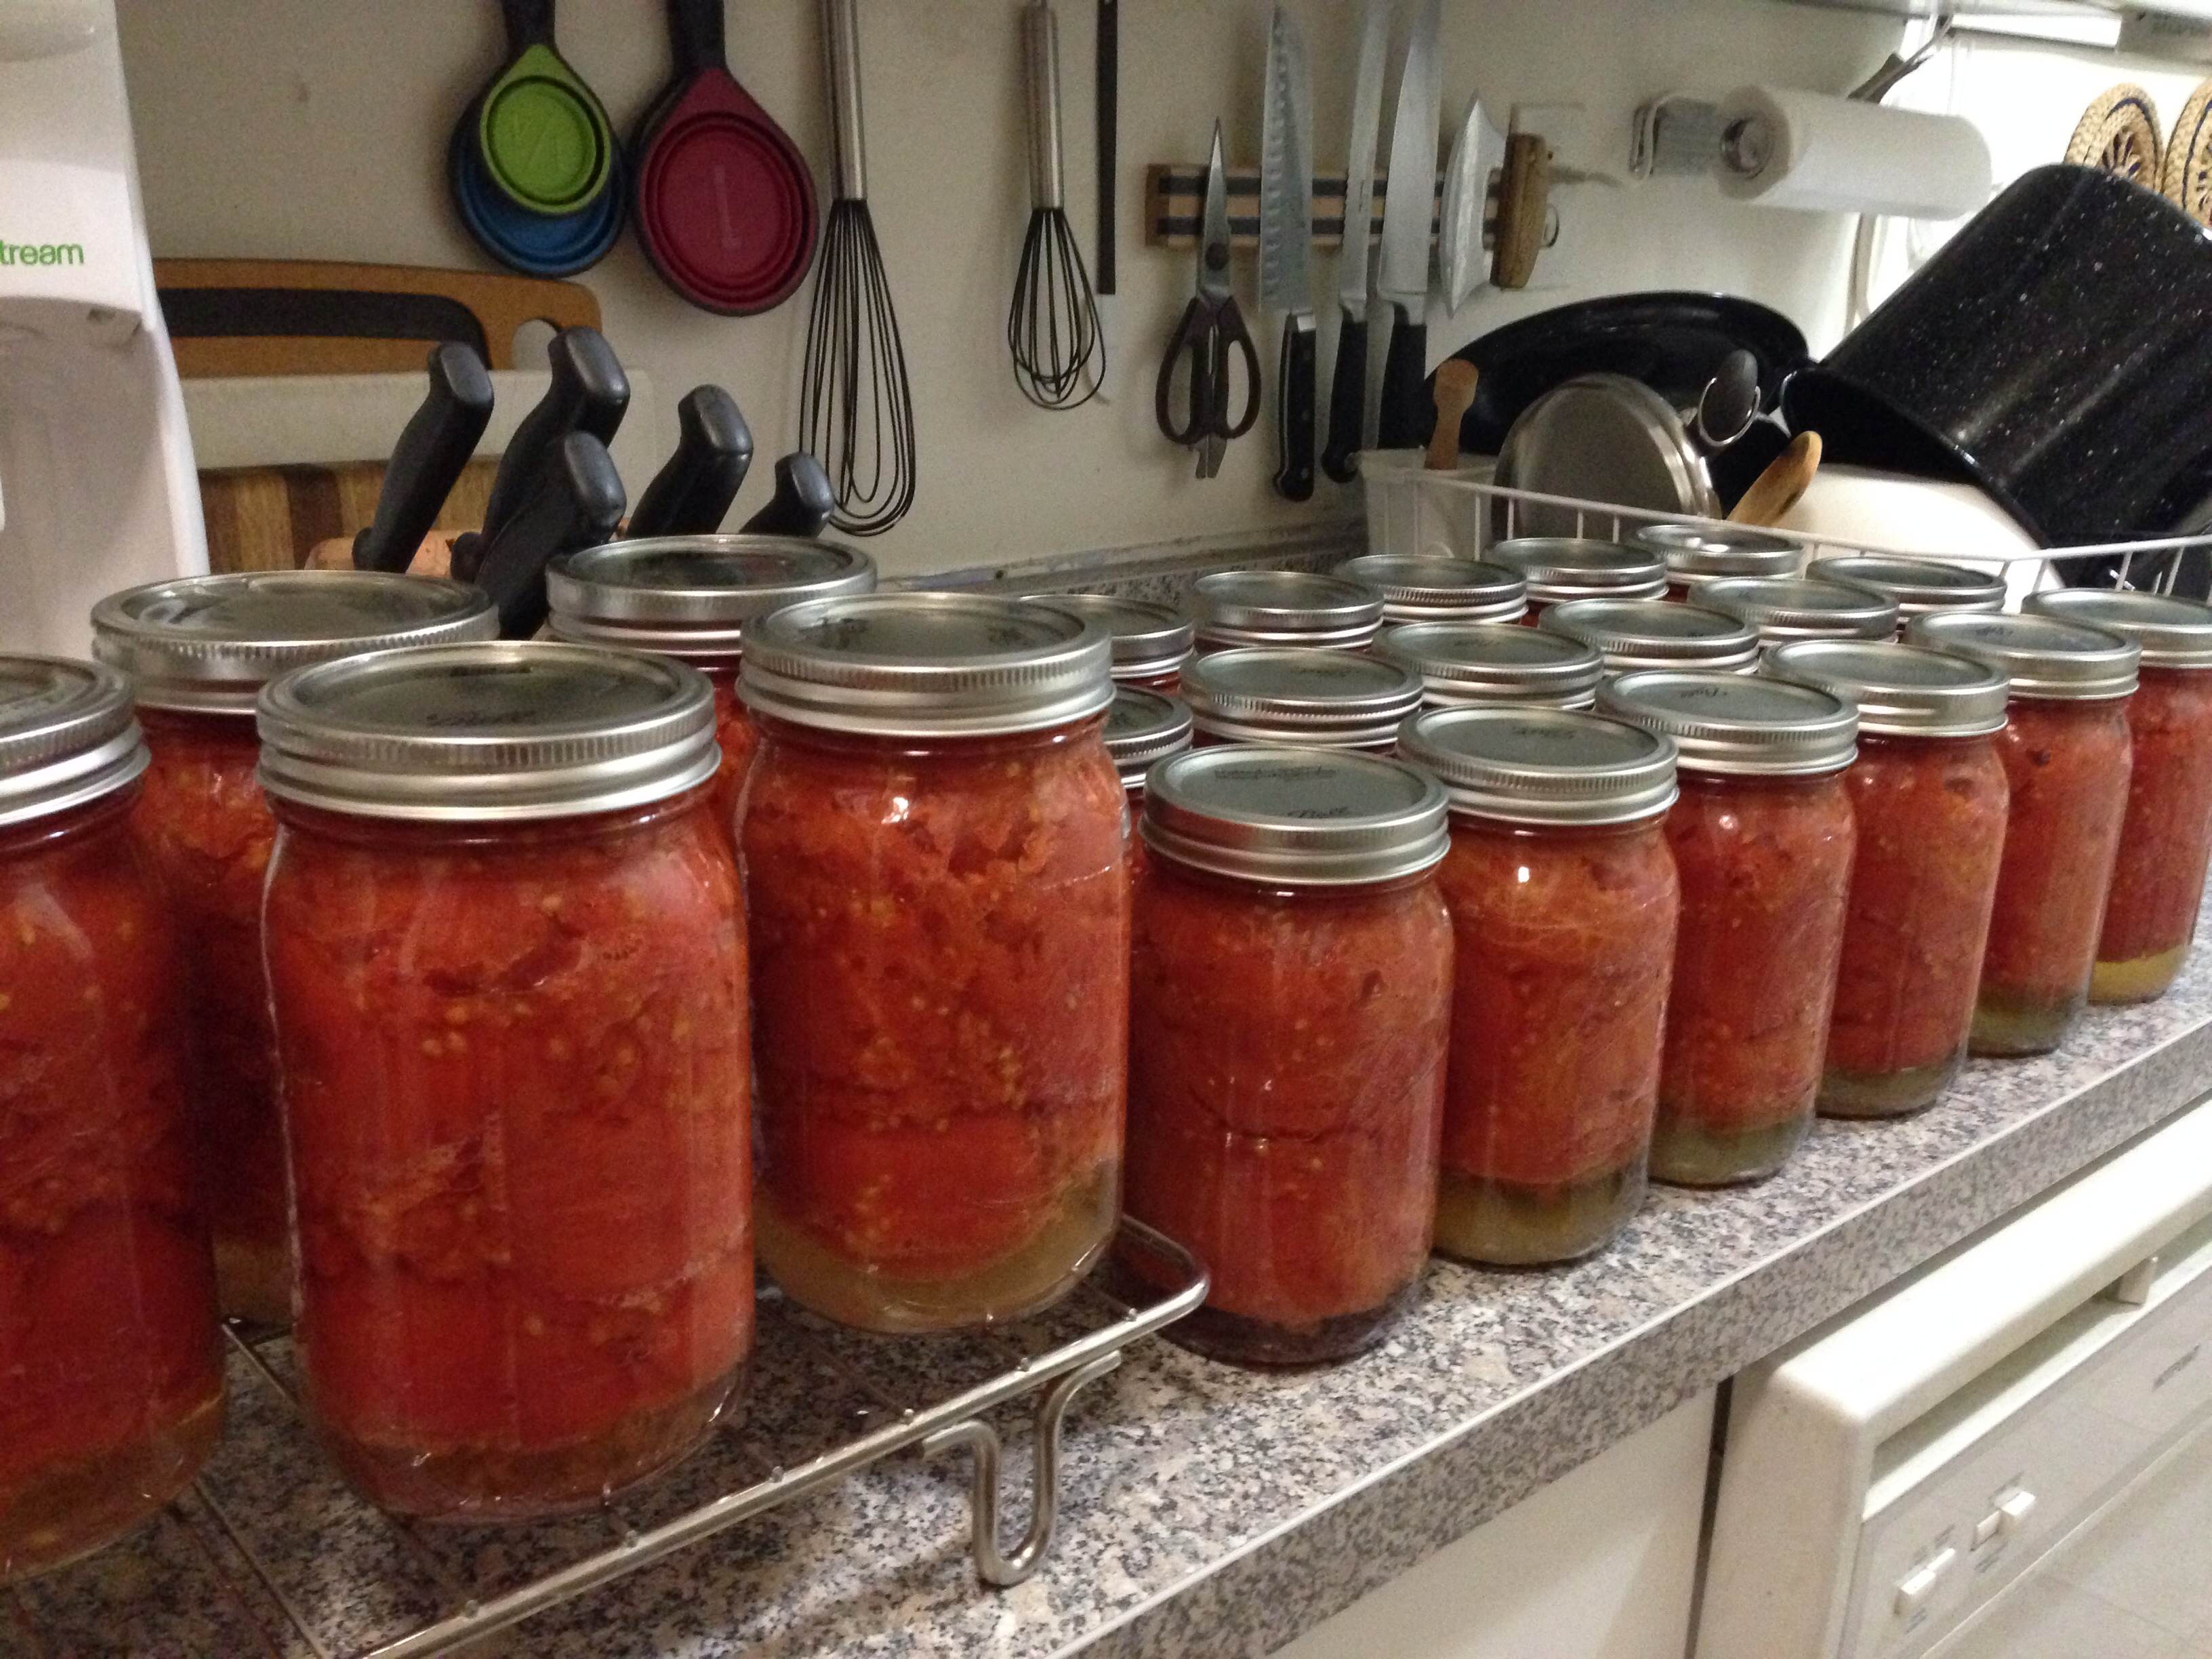 The final product: 23 quarts of home-canned tomatoes